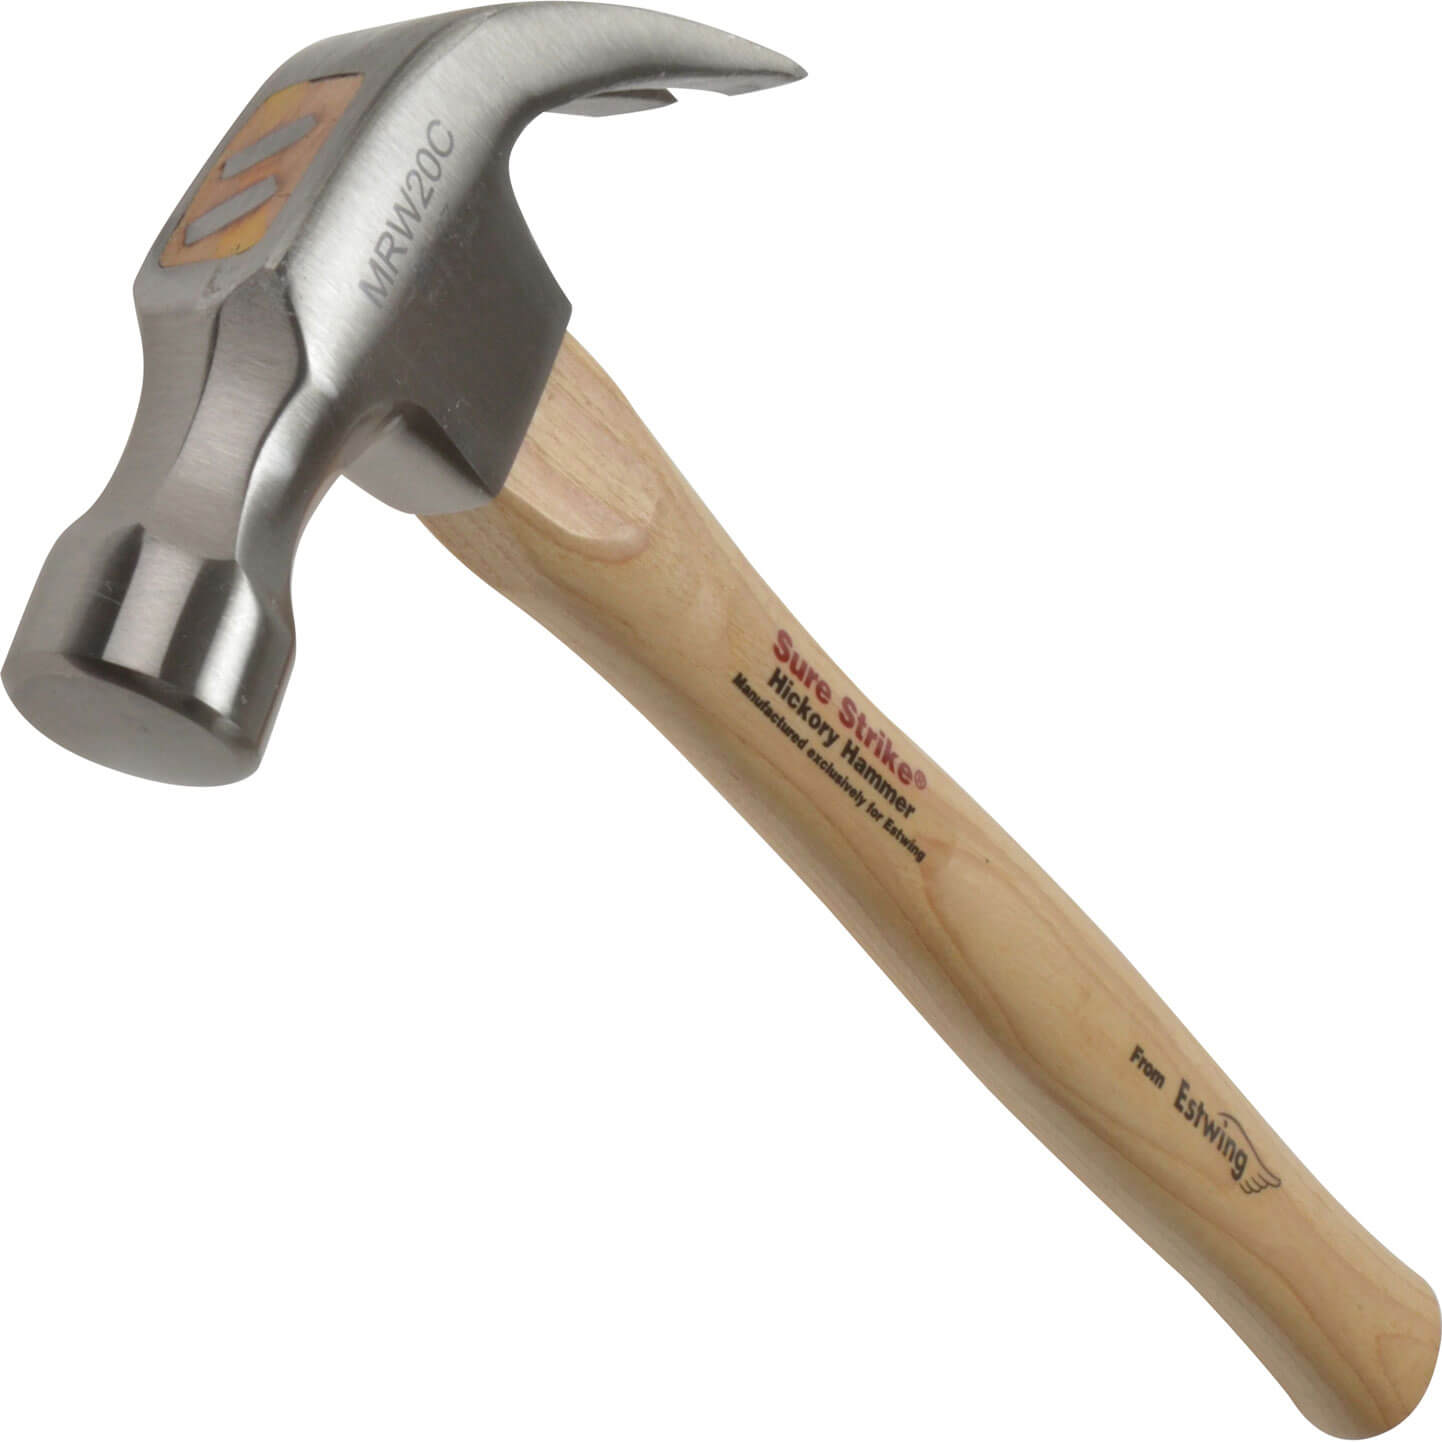 Image of Estwing Surestrike Curved Claw Hammer 560g